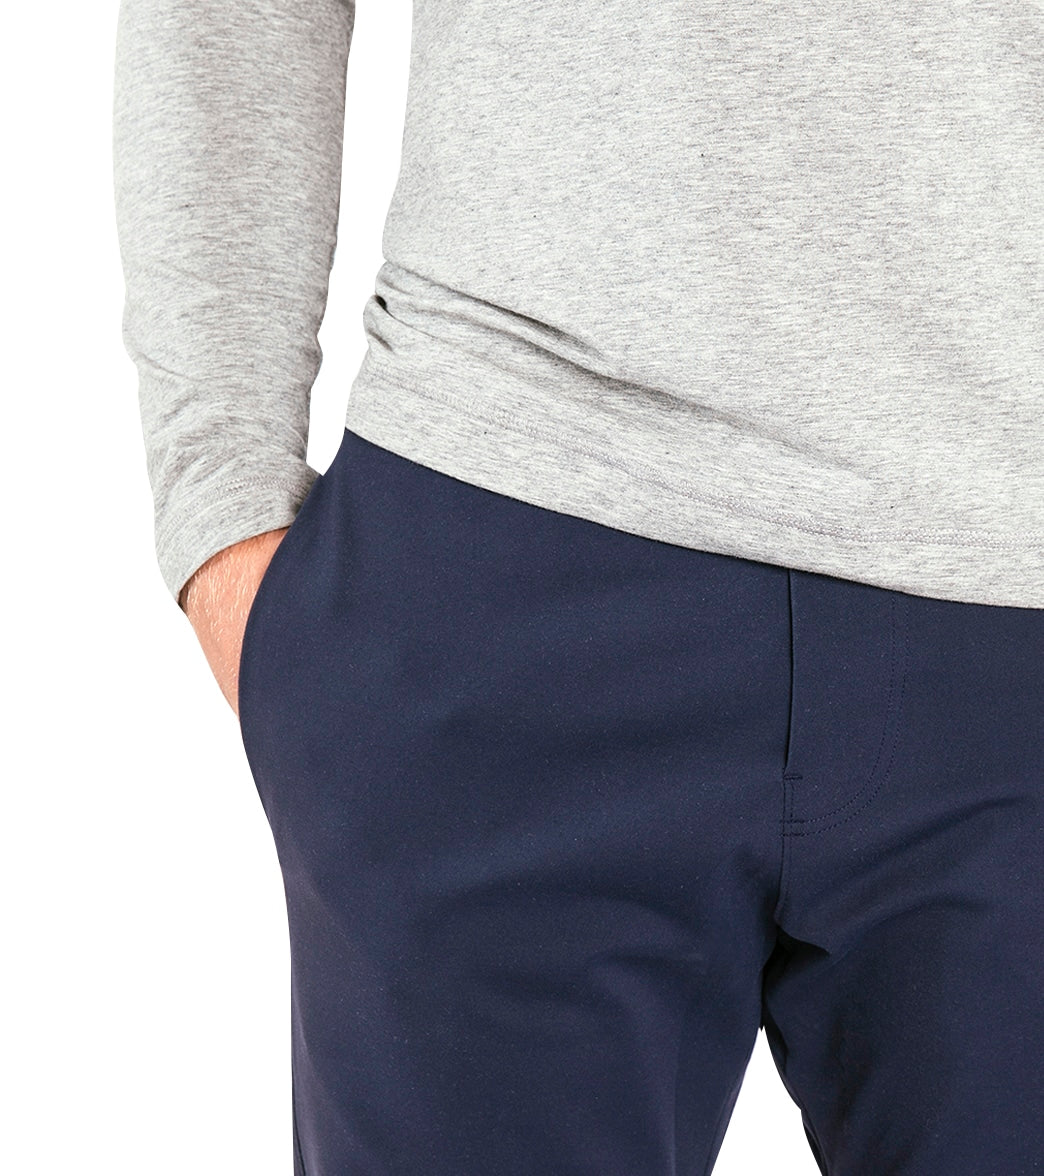 Style Pick of the Week: Public Rec Apparel All Day Every Day Pants